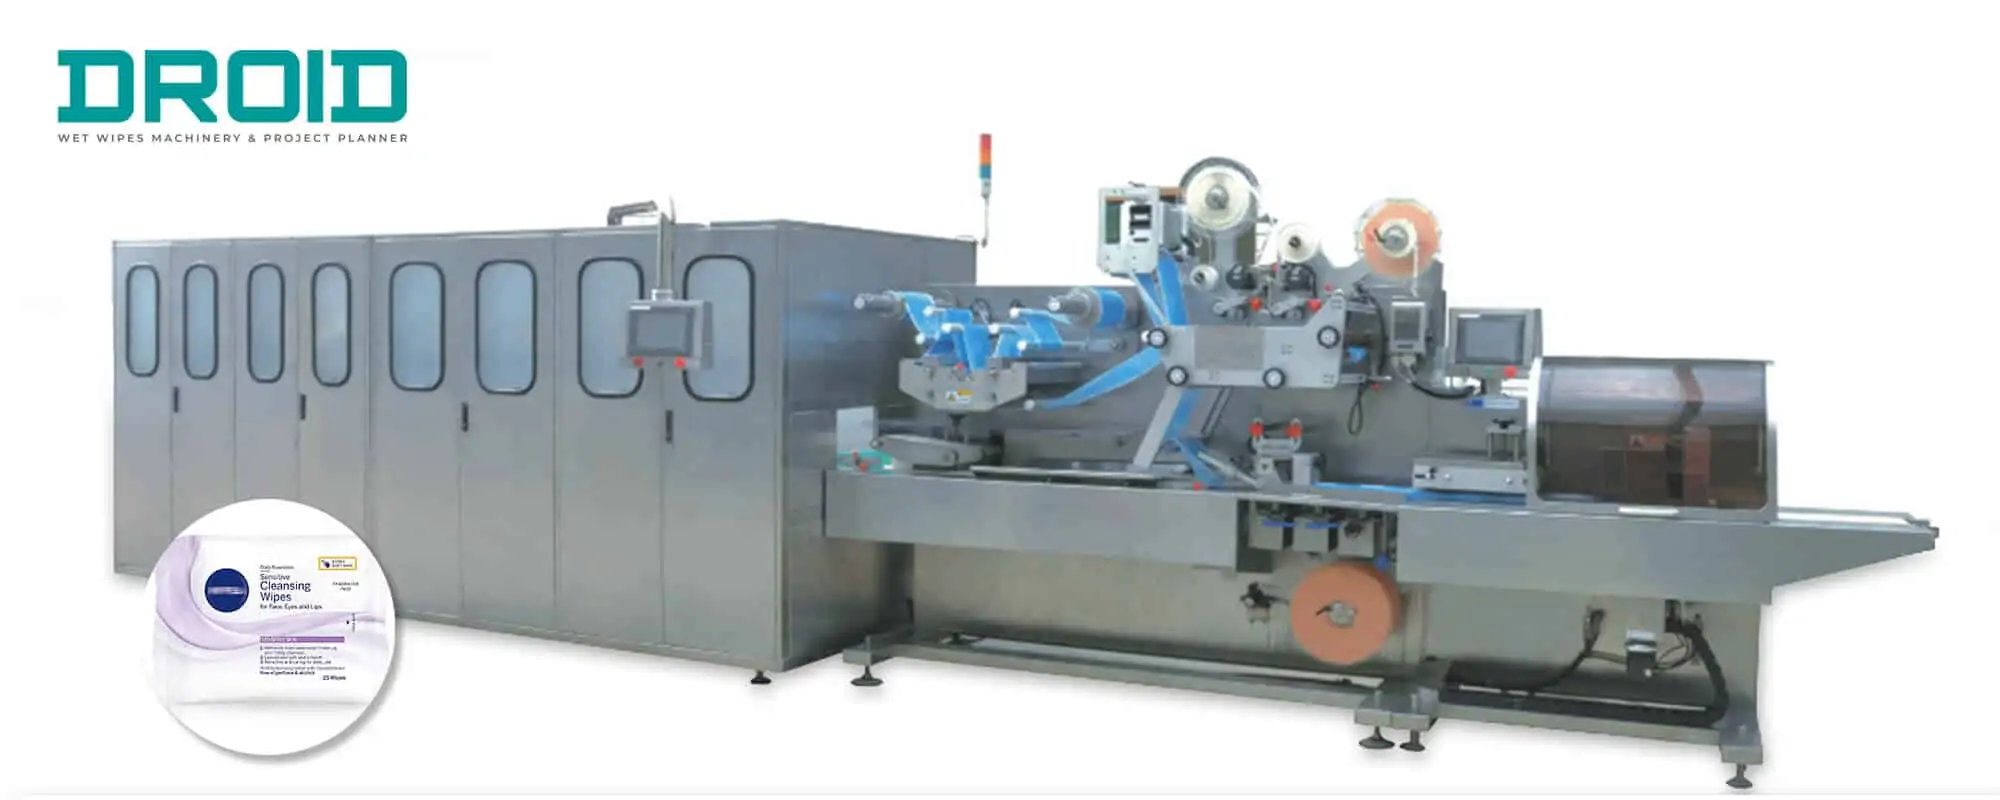 wet wipes machine - DH-MP80 Multipack Wet Wipes Bagging Machine